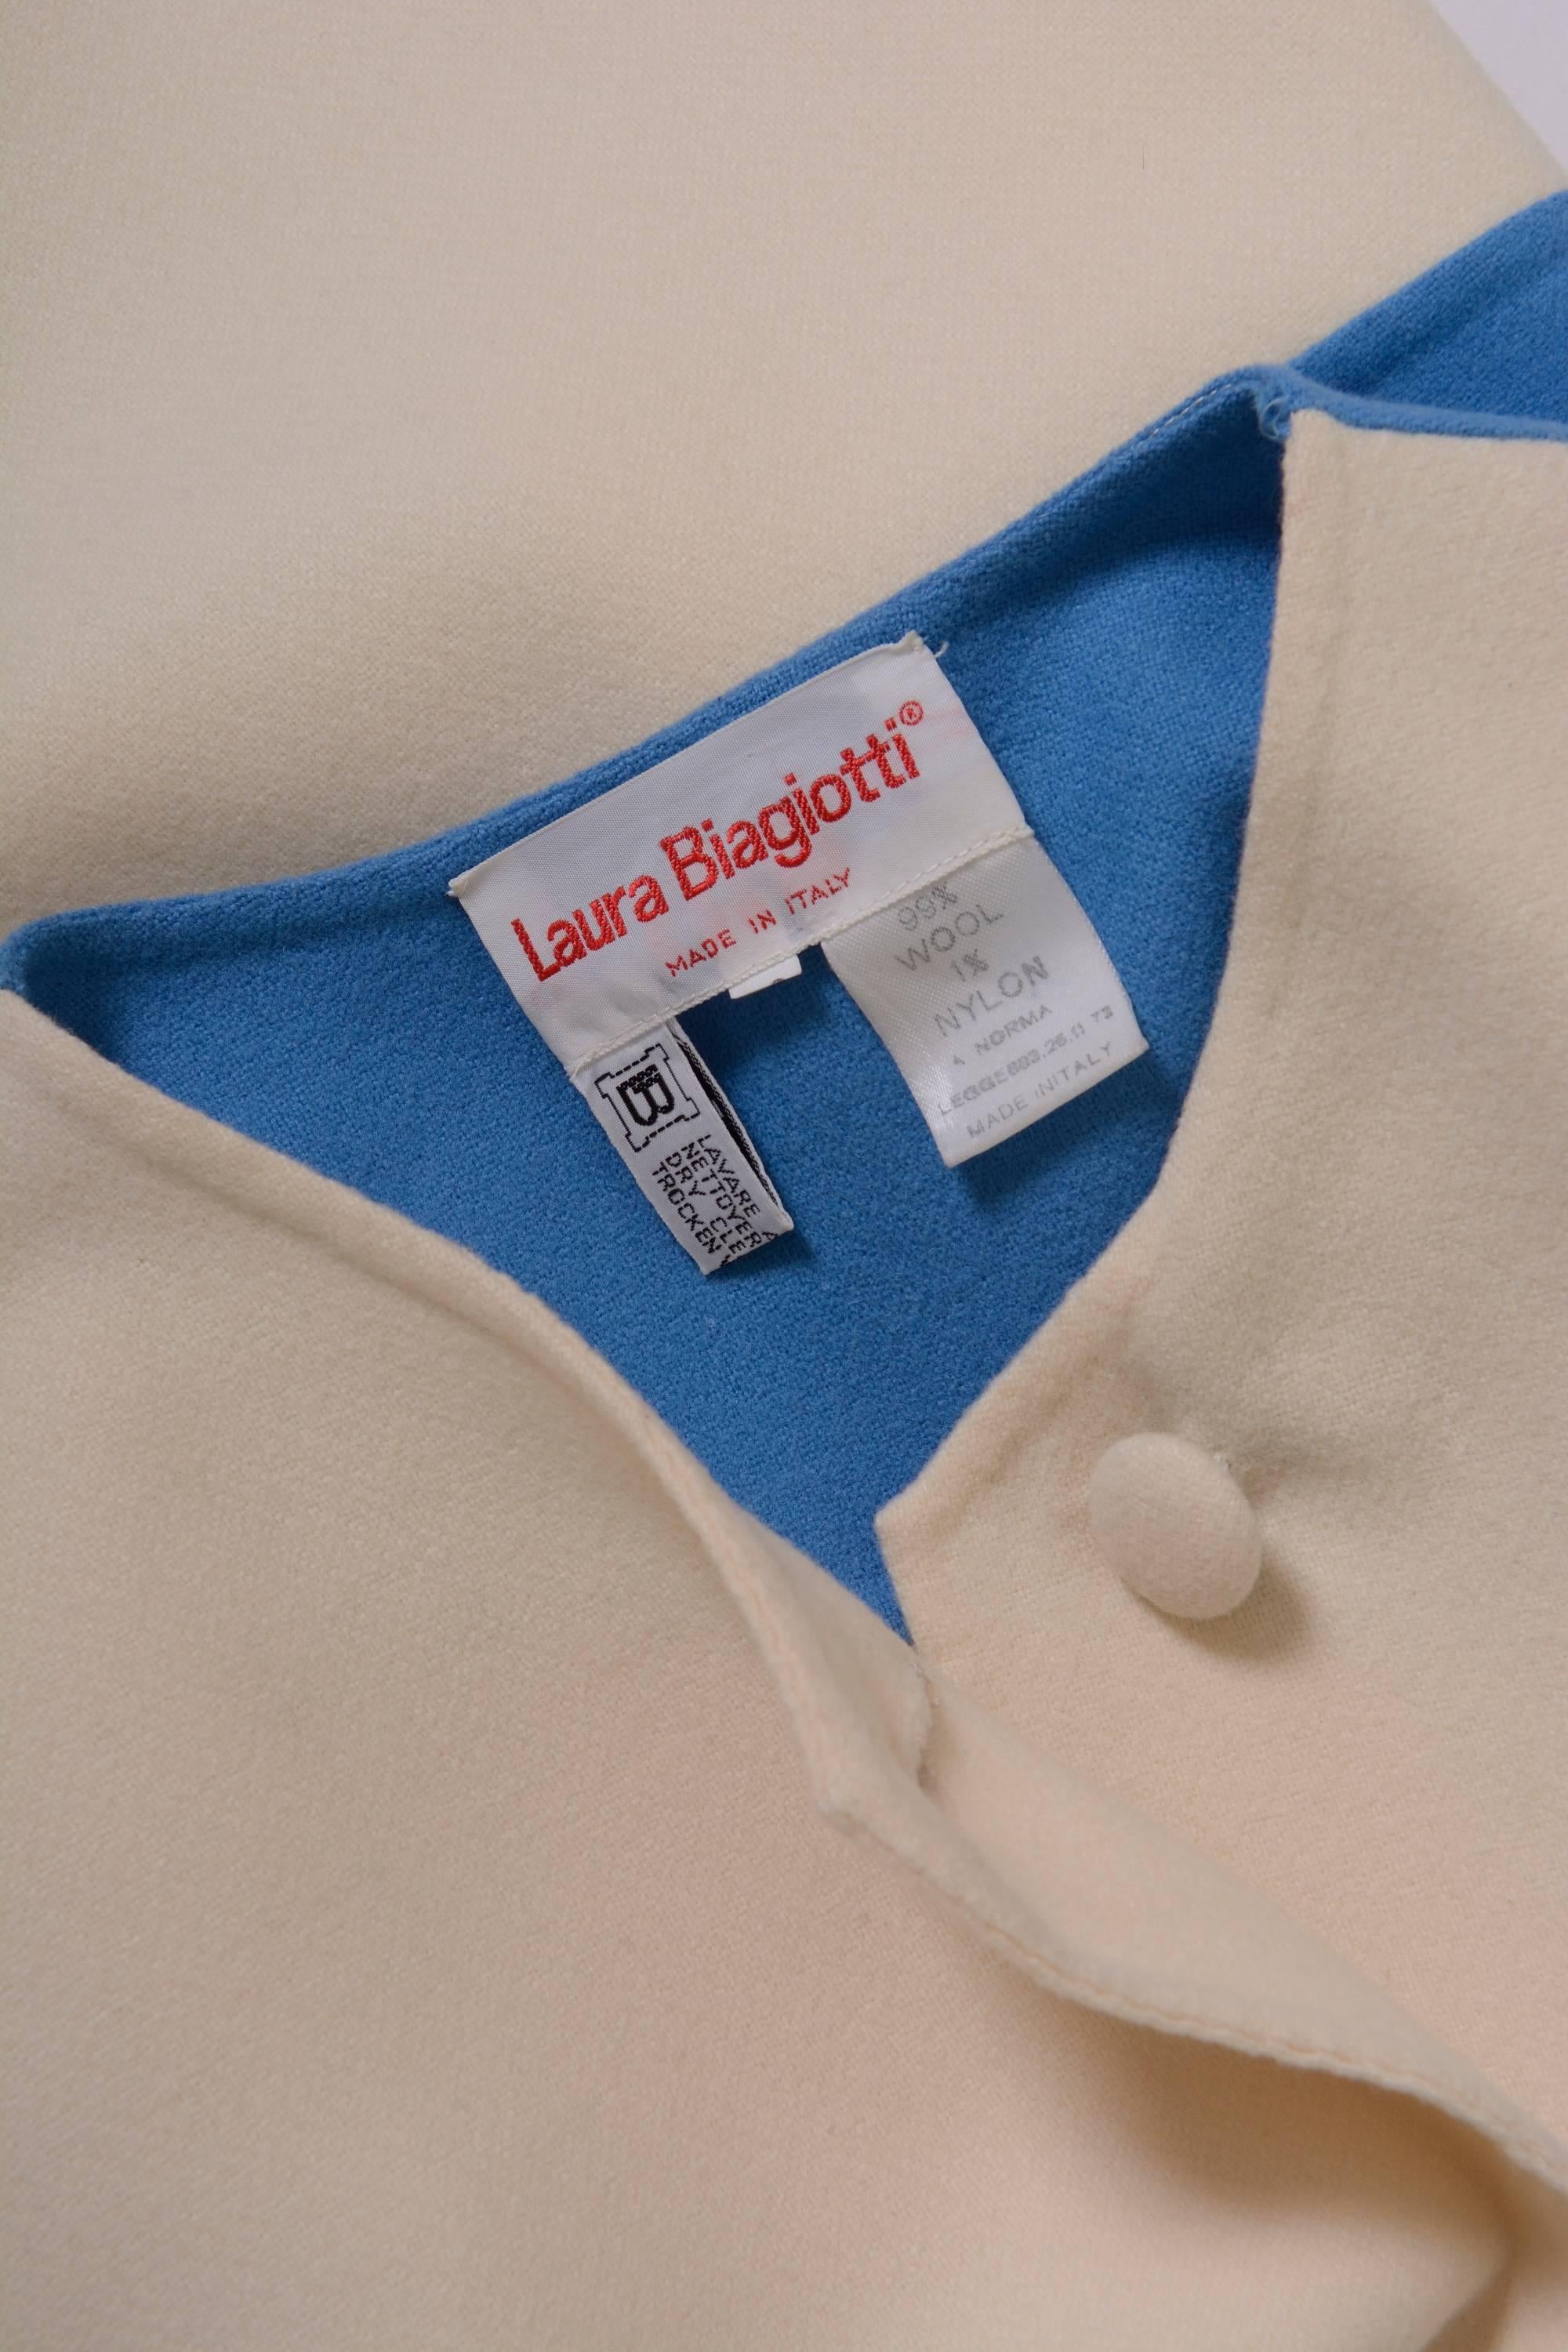 Laura Biagiotti White And Blue Sky Patchwork Oversize Tent Coat,  1990s  In Excellent Condition For Sale In Milan, Italy